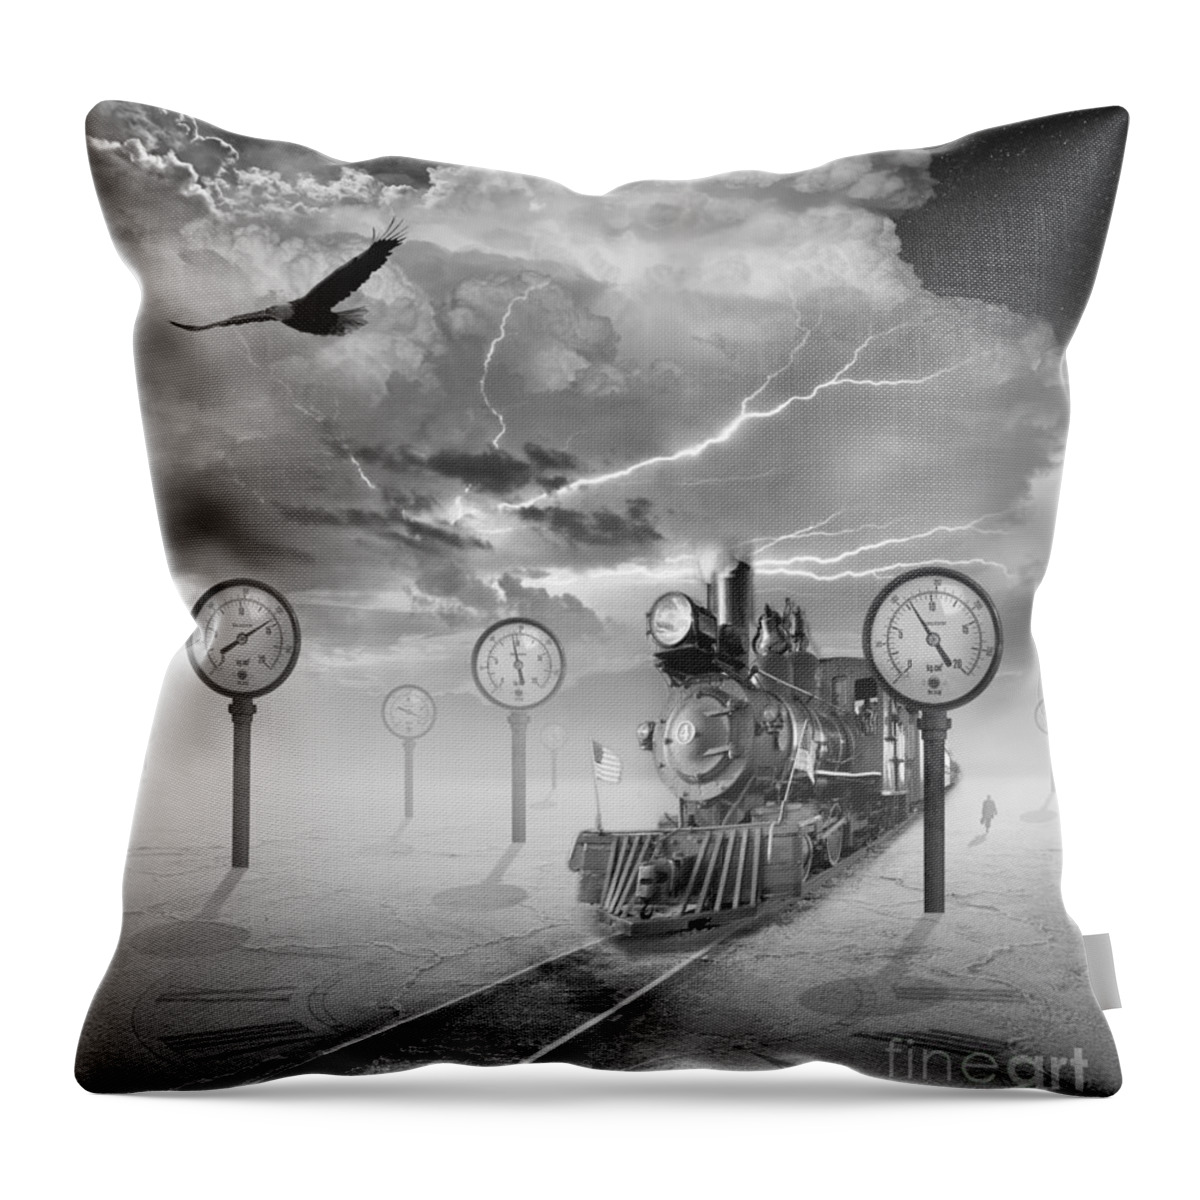 Steampunk Throw Pillow featuring the photograph Steampunk Traveler by Keith Kapple